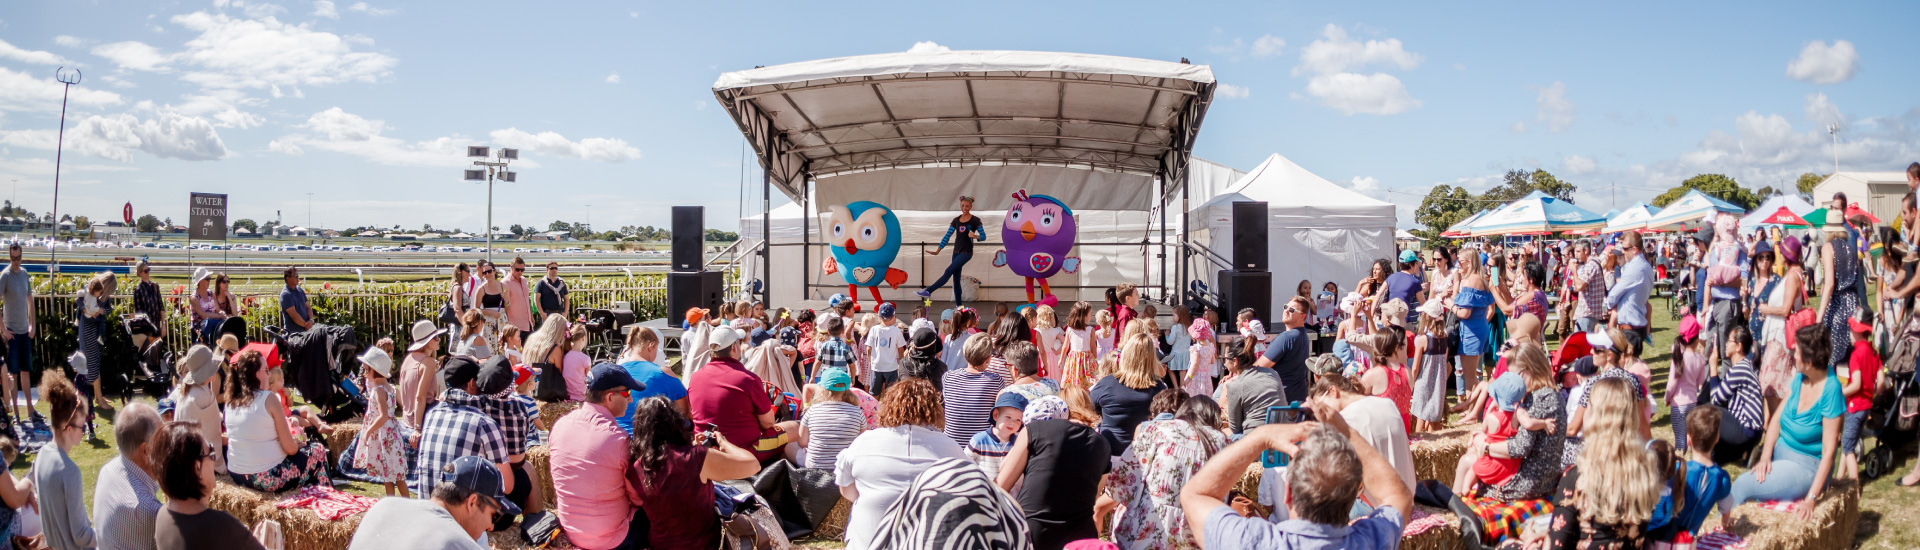 See your favourite kids entertainment performing on the main stage, while enjoying a great day out with family and friends.